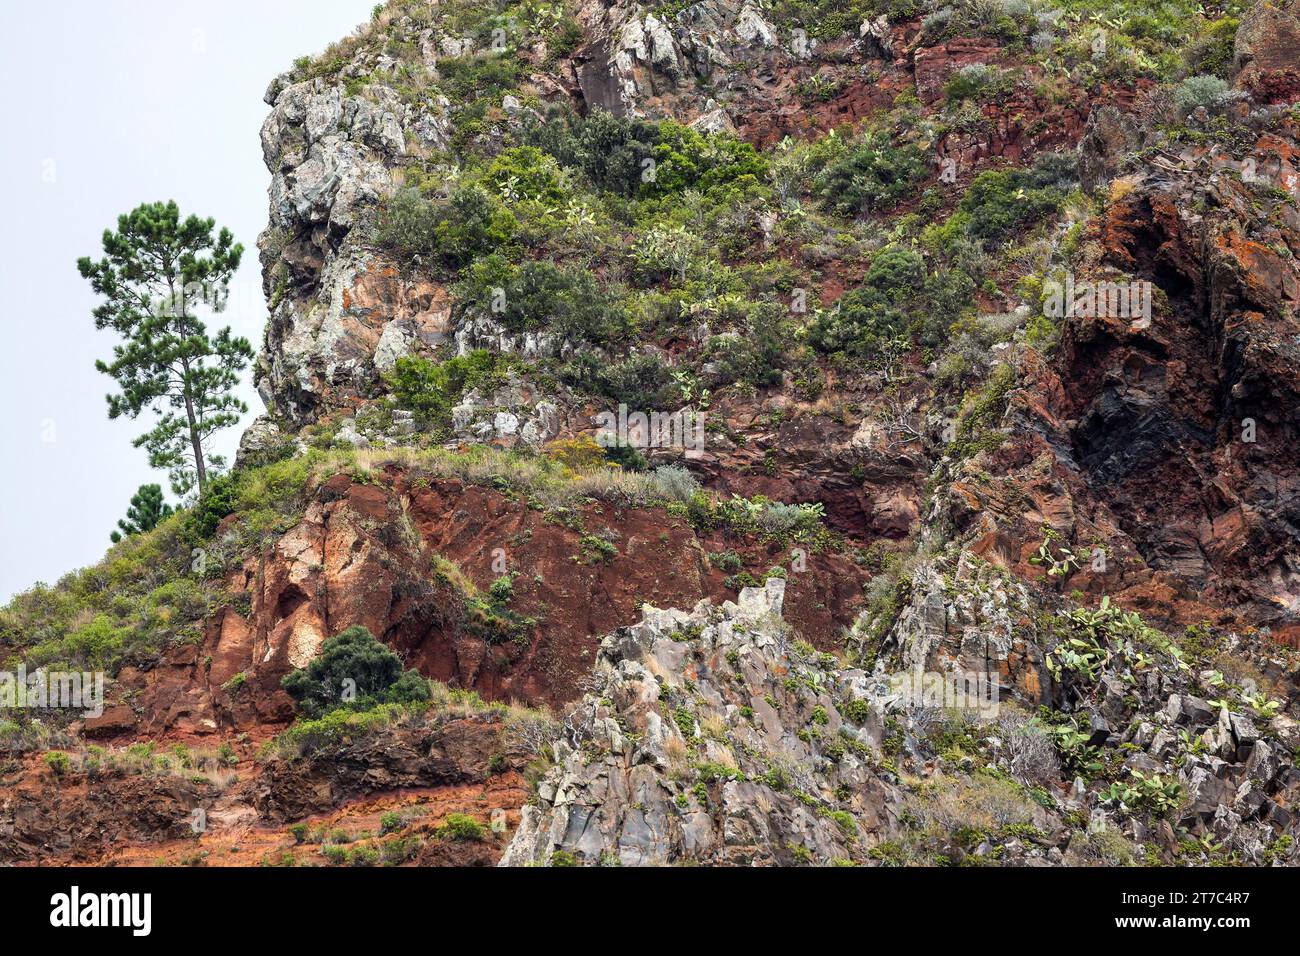 Weathered lava rocks on the cliffs, overgrown with plants, near Paul do Mar, Madeira, Portugal Stock Photo